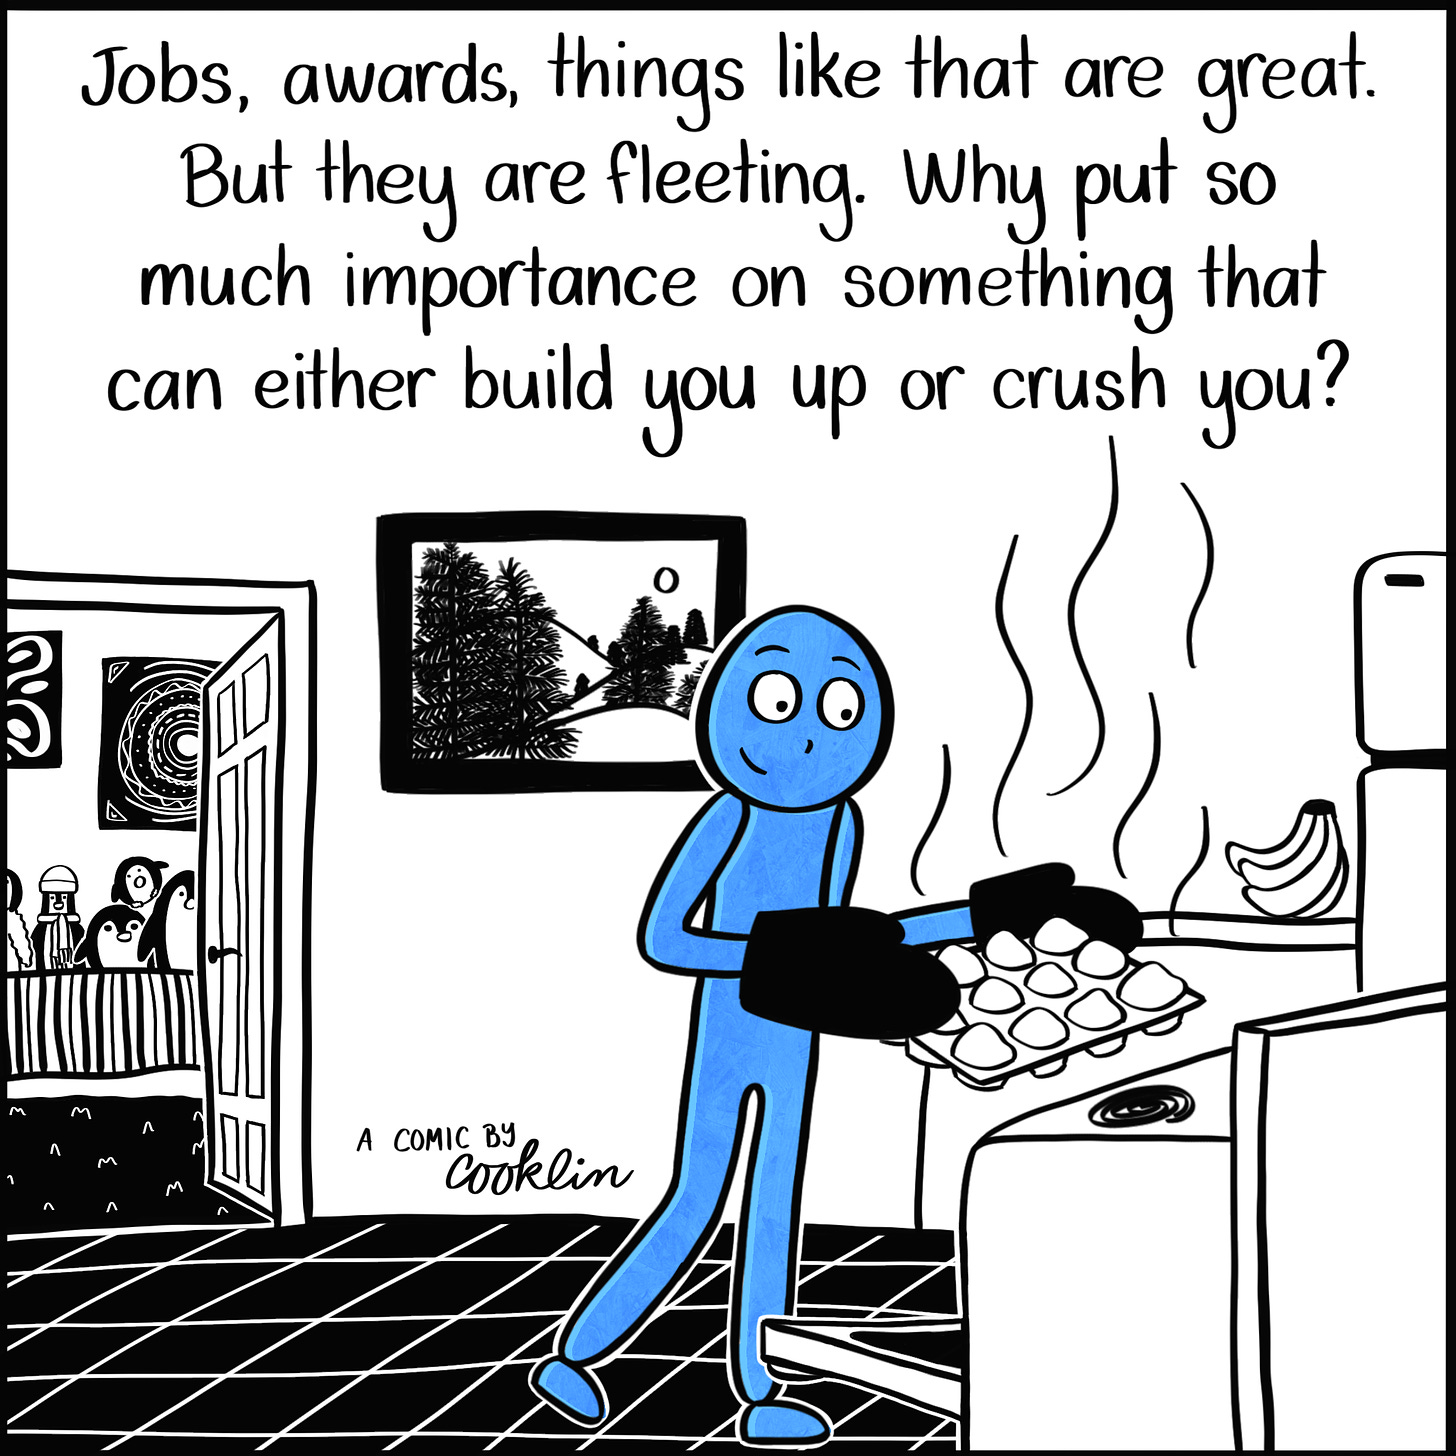 Caption: Jobs, awards, things like that are great. But they are fleeting. Why put so much importance on something that could either build you up or crush you? Image: Blue person pulls muffins out of the oven in their kitchen. To the left, their bedroom door is open, where the penguins lined up on the bed can be seen.